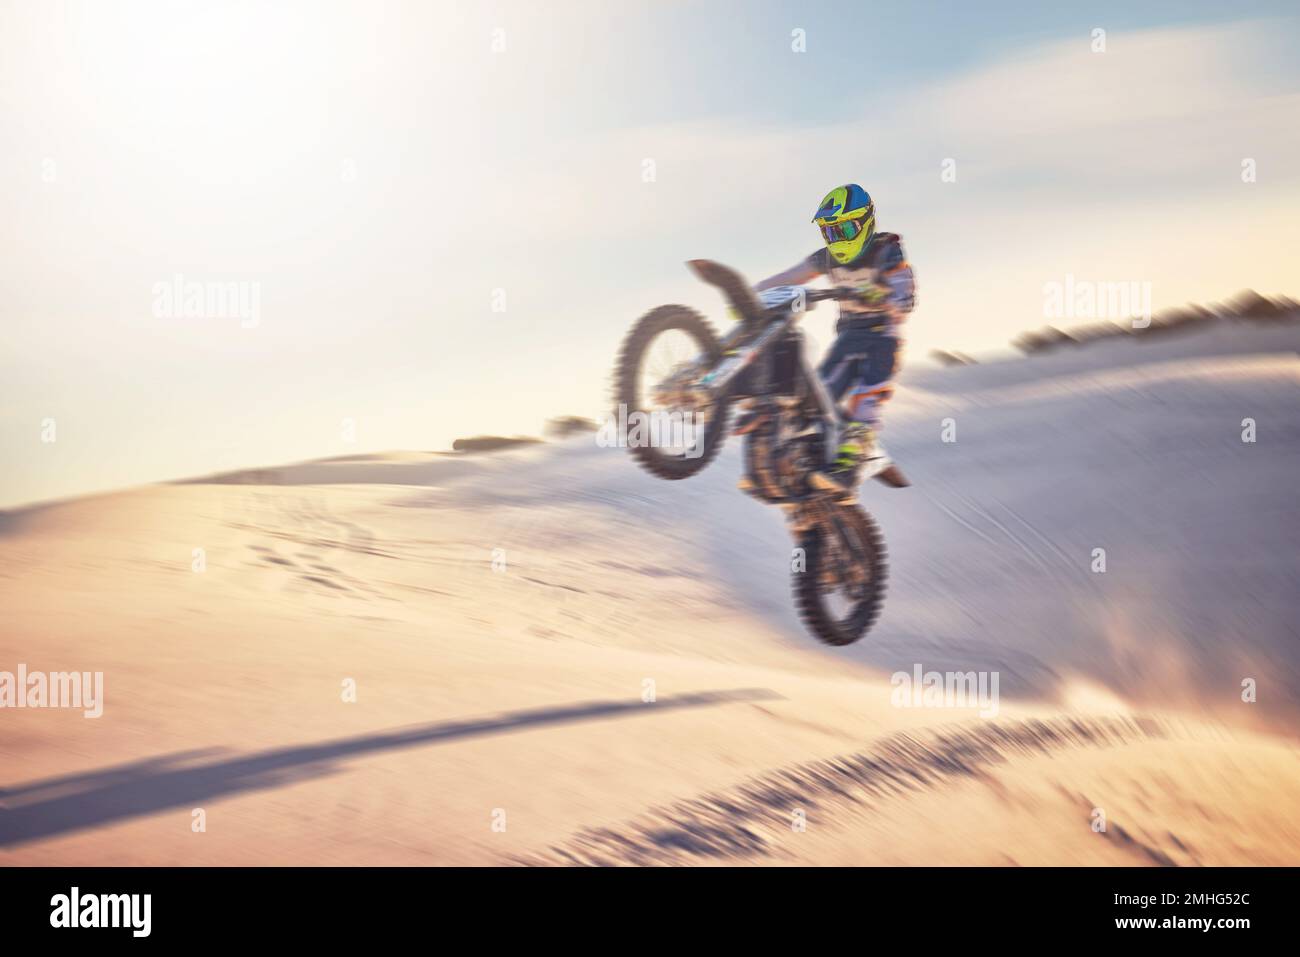 Motorcycle, athlete and sports outdoor with jump stunt, fitness in desert and extreme sport with speed and freedom. Challenge, power and biking with Stock Photo